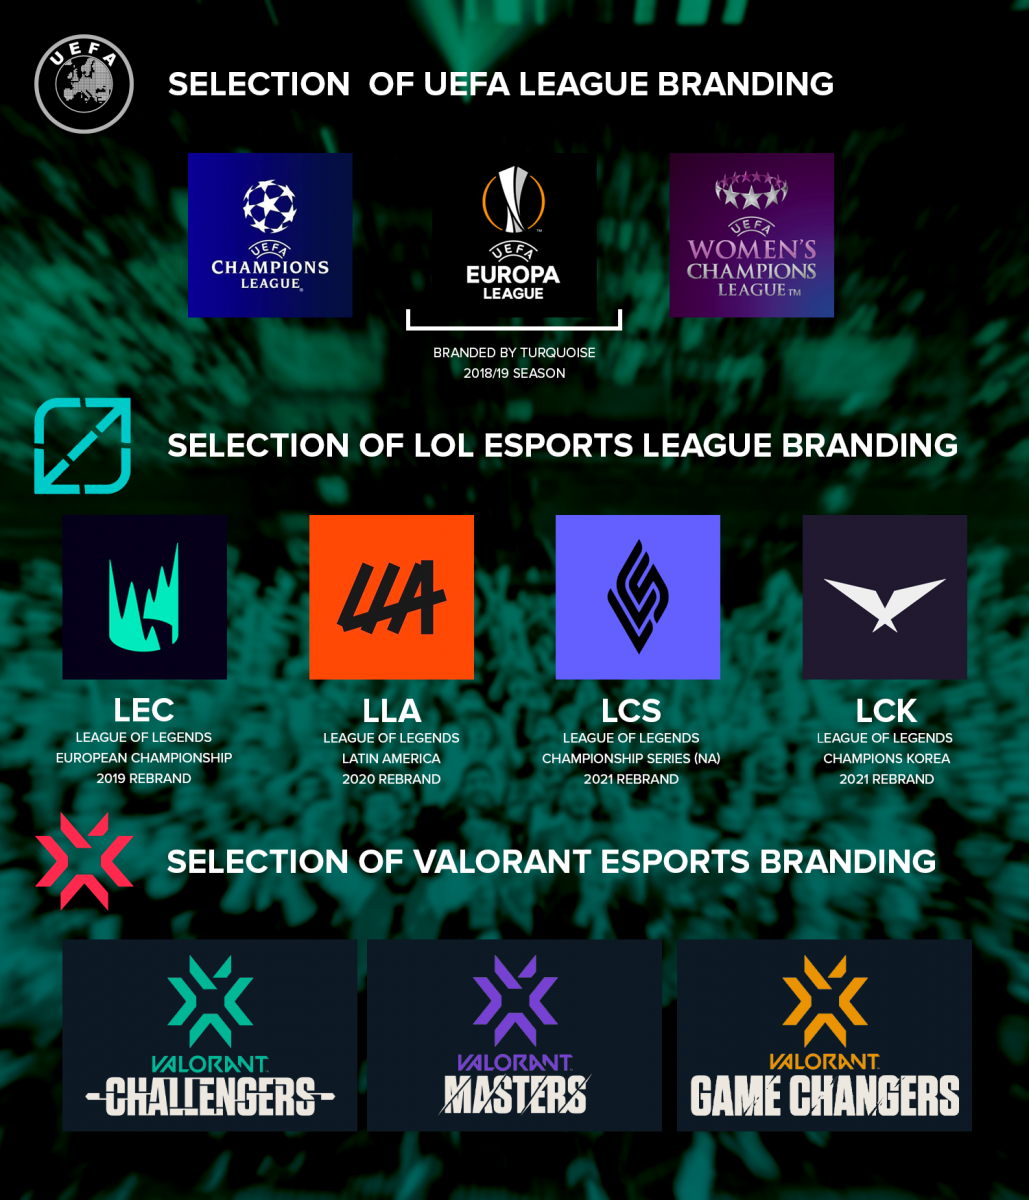 Turquoise: Selections of League Branding